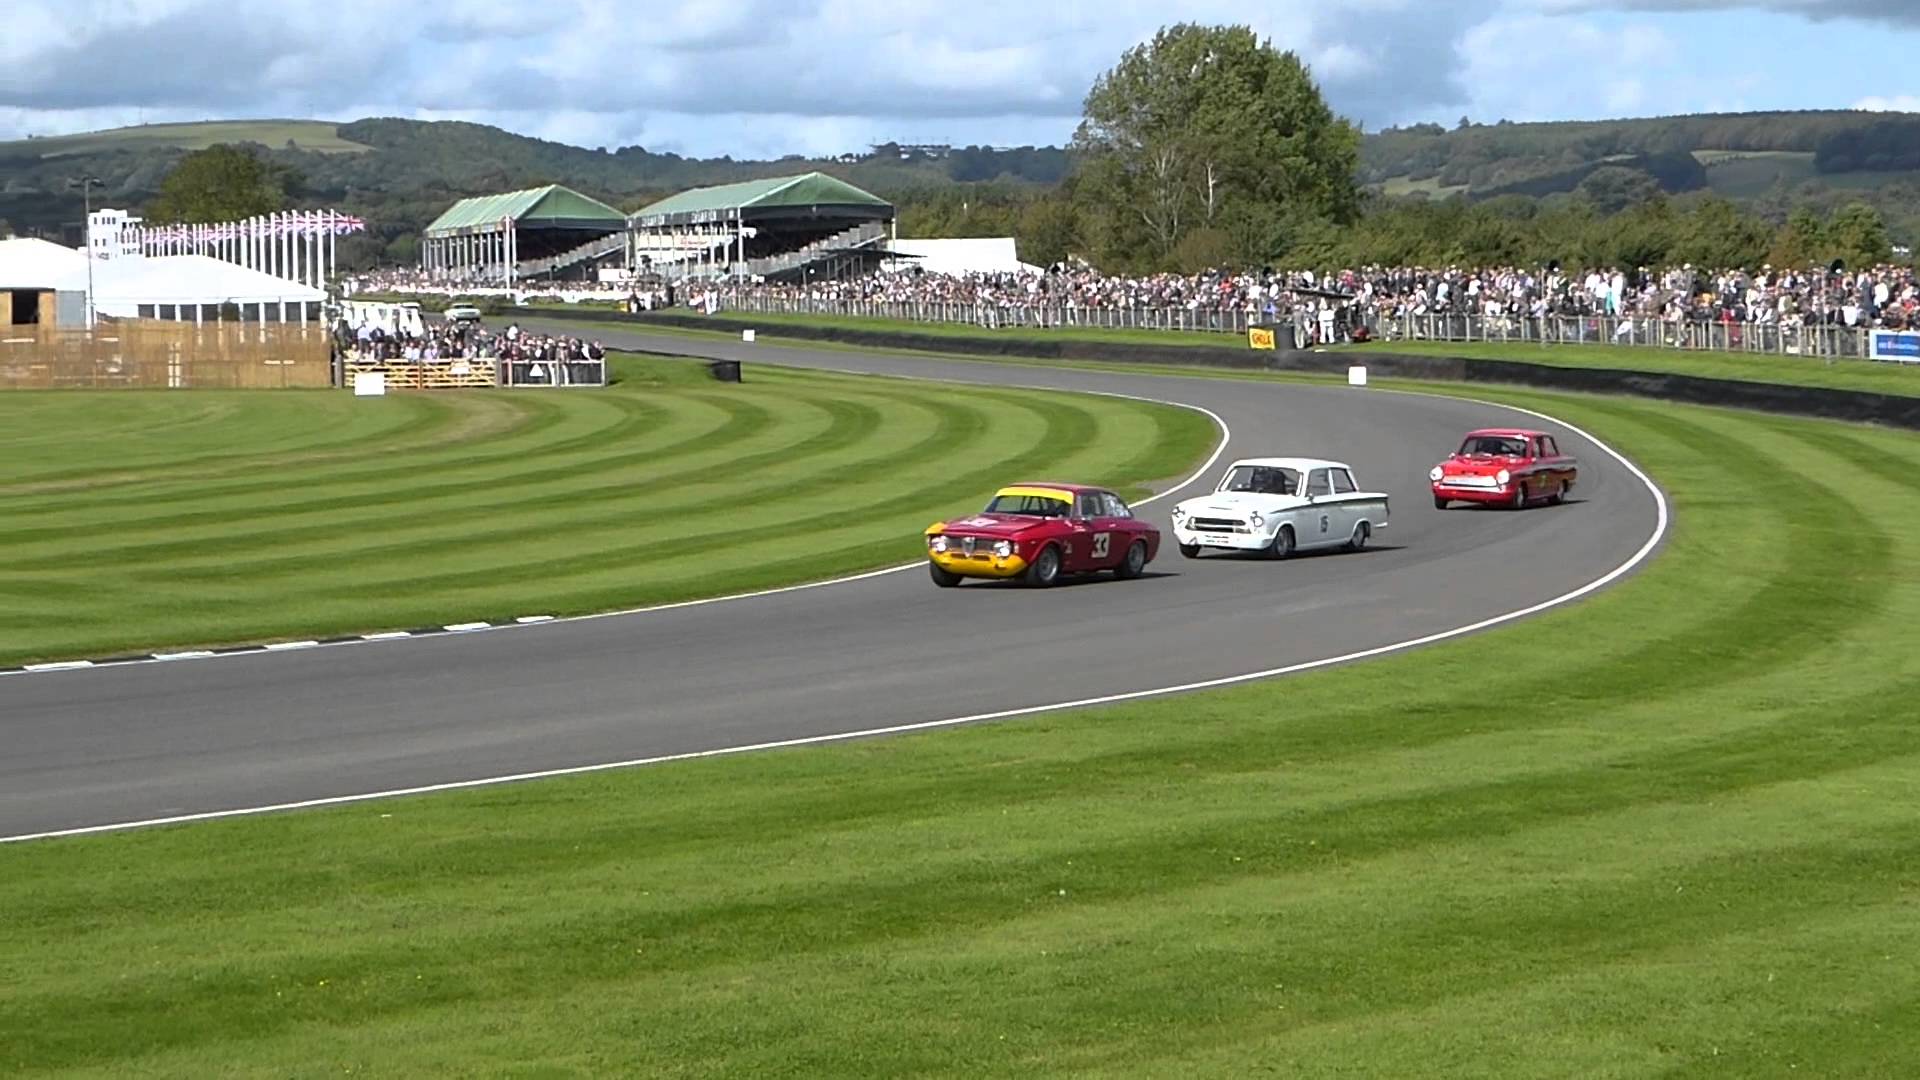 All Things motor racing A look at the famous Goodwood motor circuit